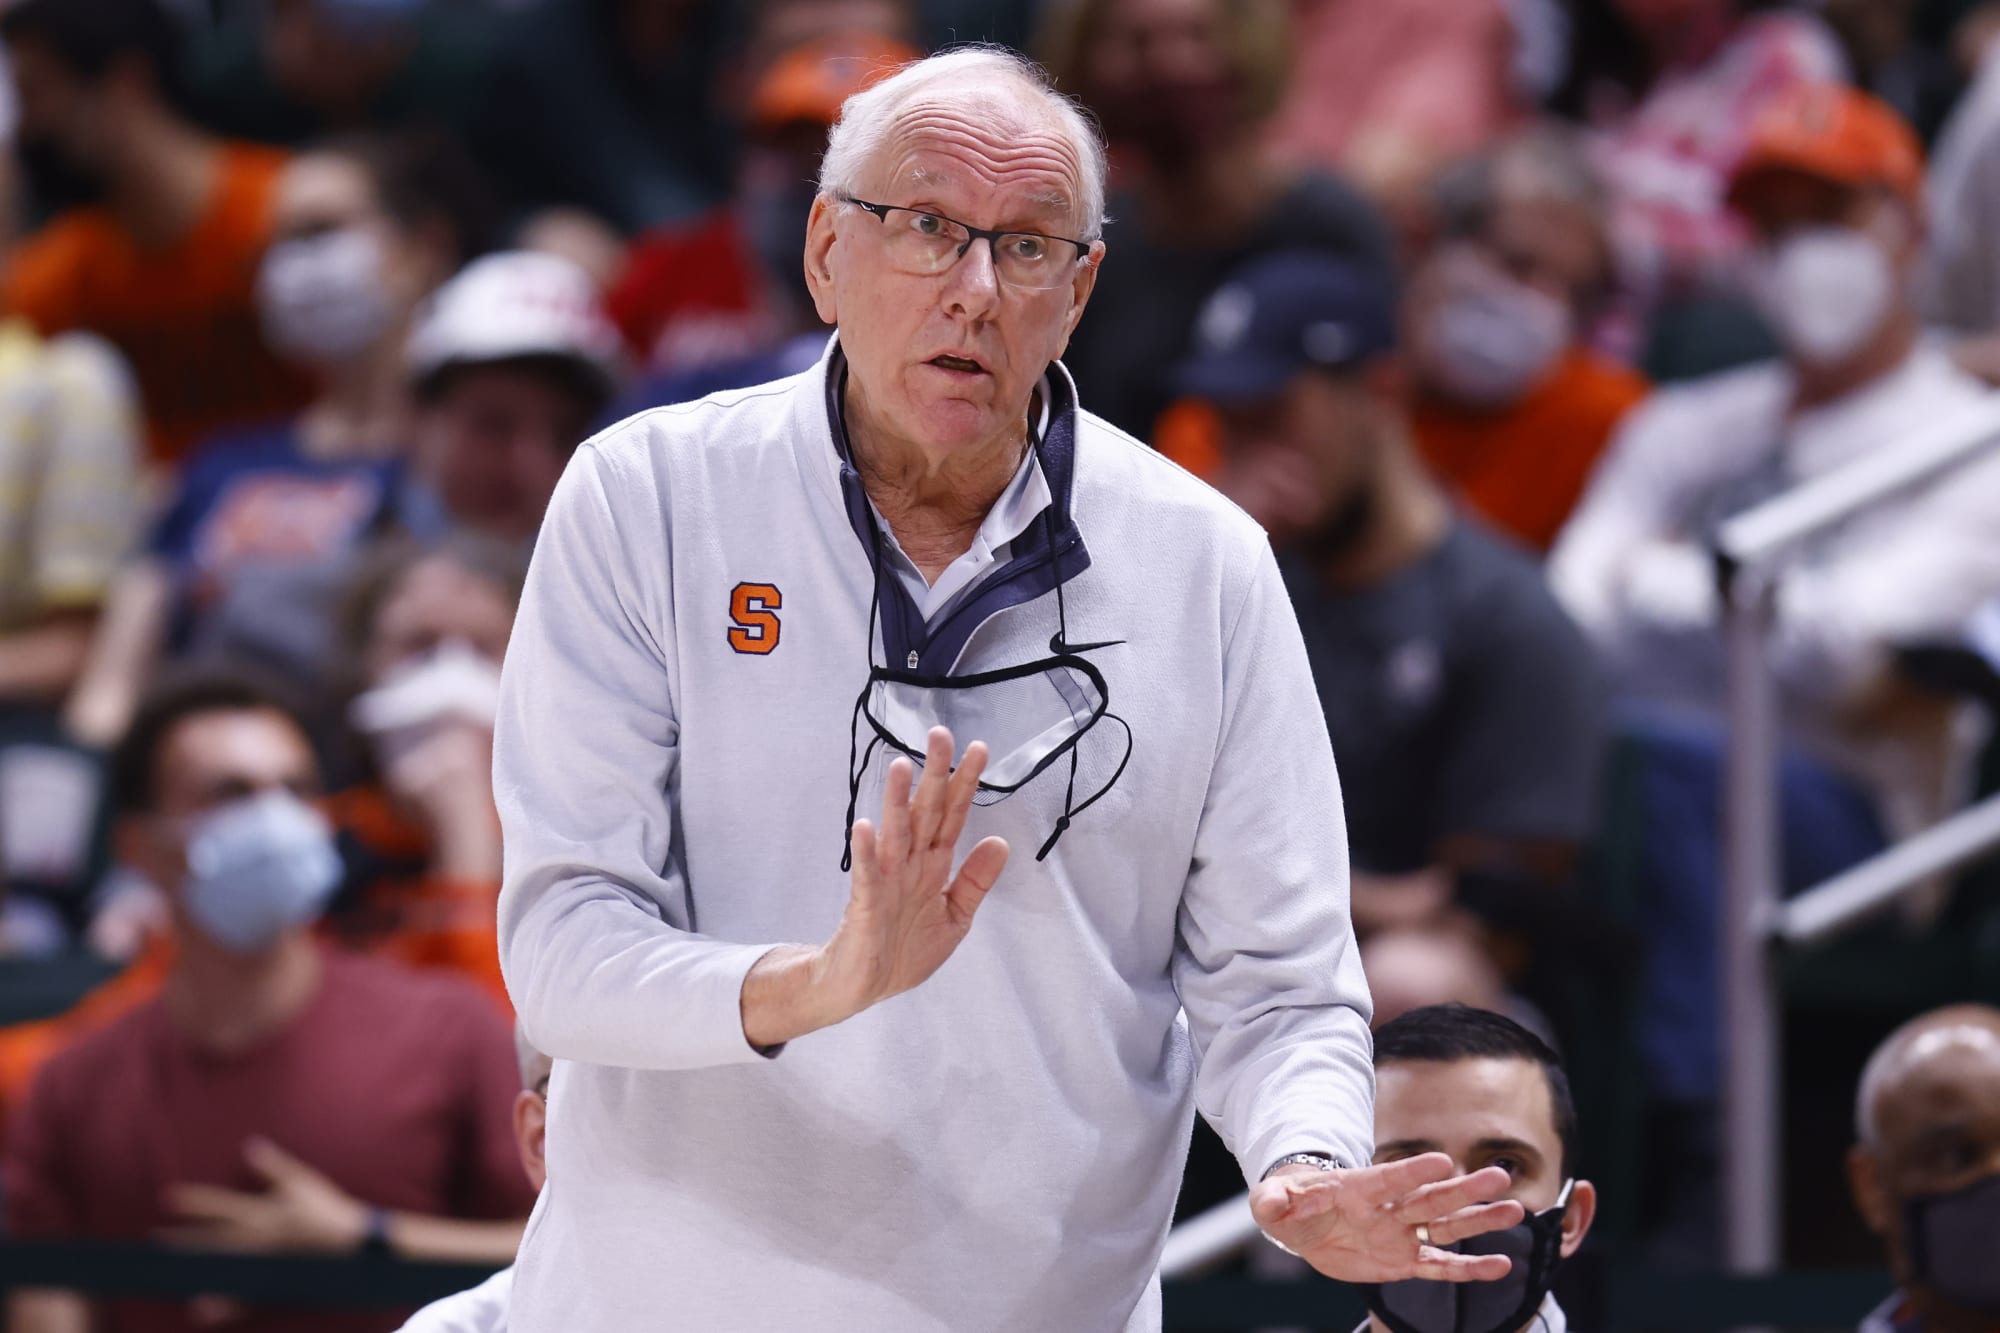 After visit, Syracuse basketball appears in strong shape with 4-star guard